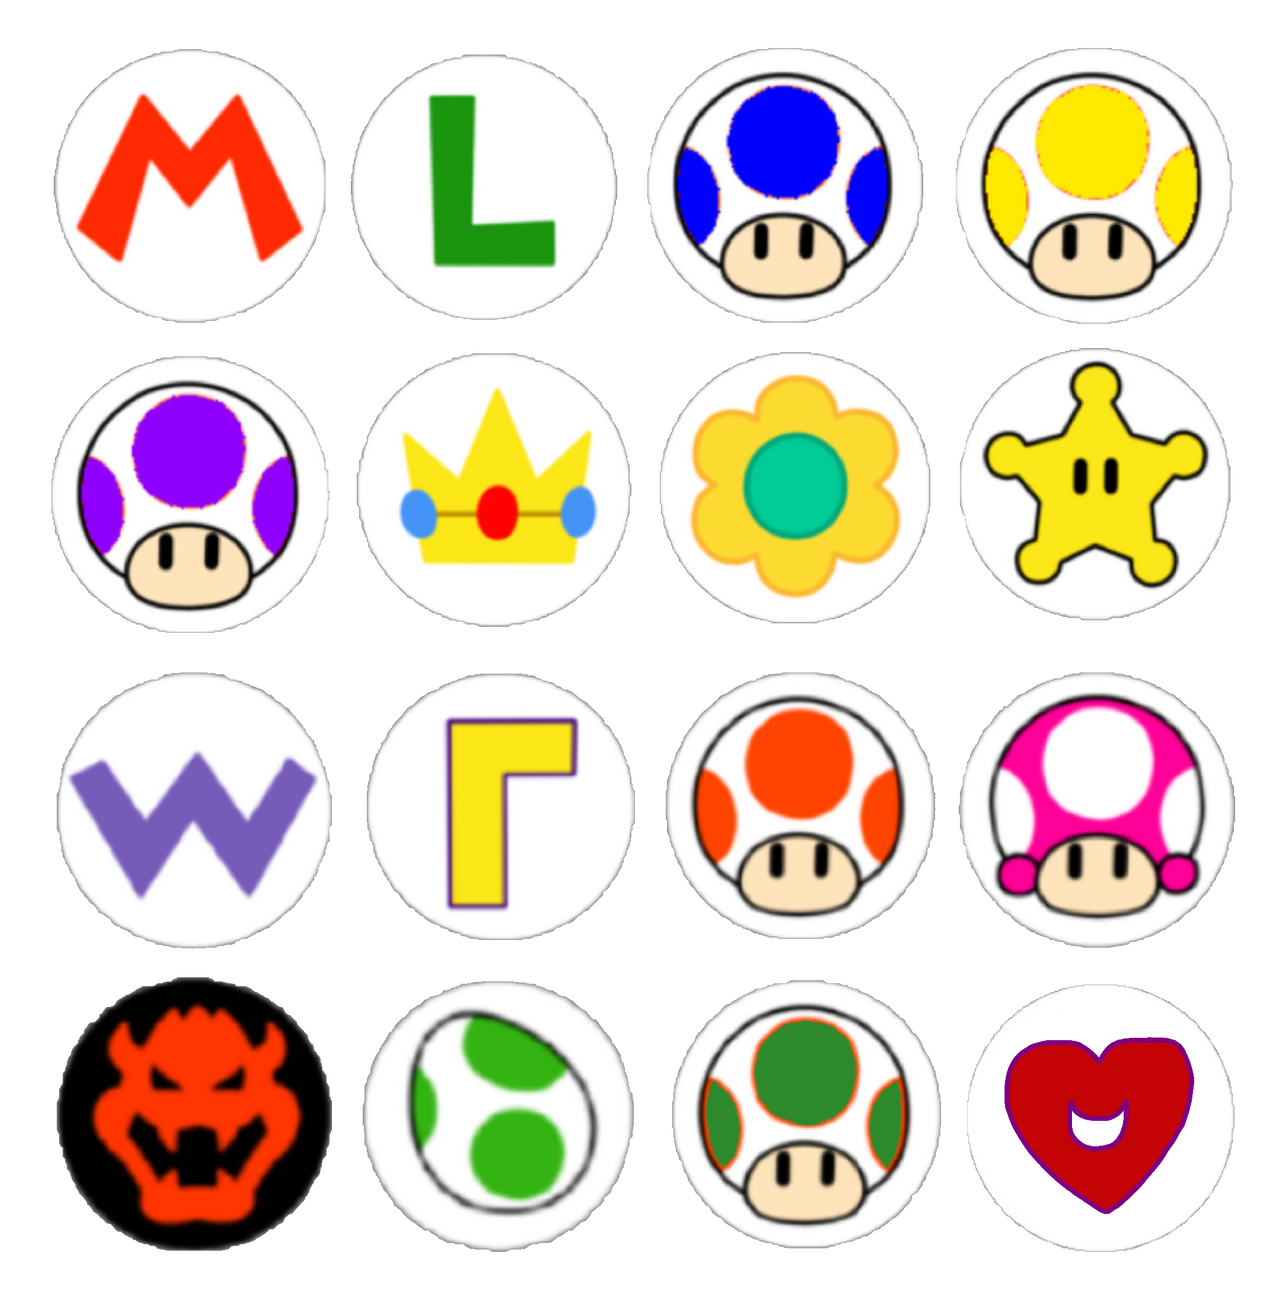 Super Mario: All 16 Character Emblems by Joshuat1306 on DeviantArt